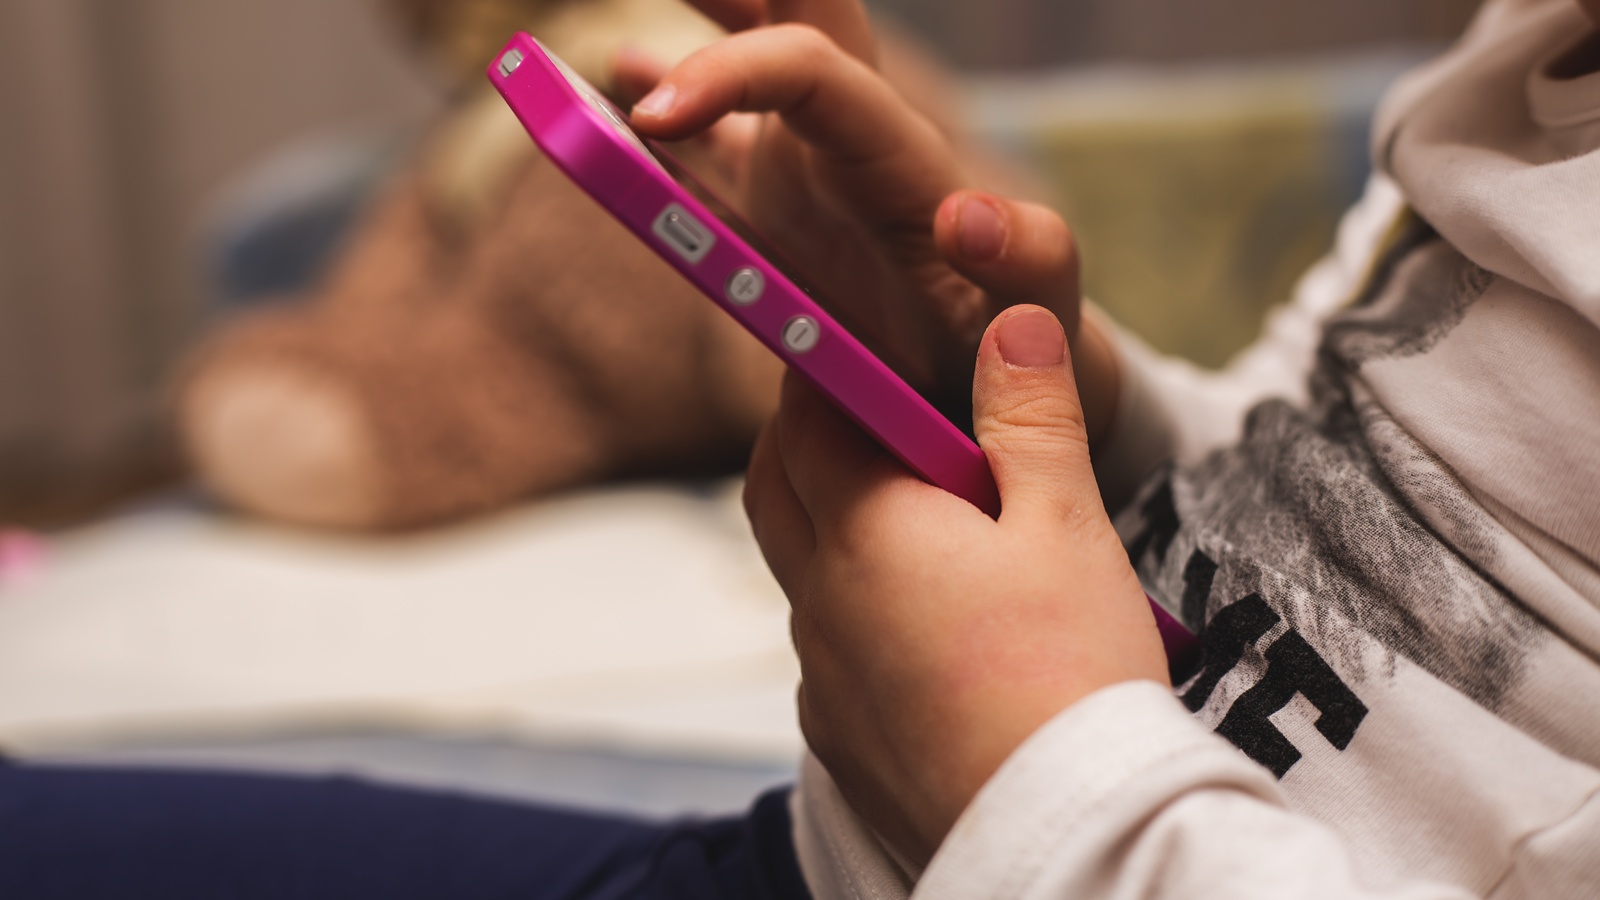 Ofcom sets out safety proposals to ensure tech firms keep children safe online